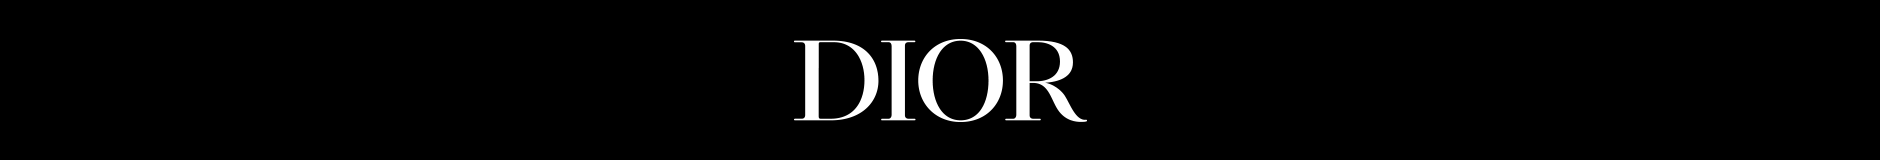 Dior Teams With Bergdorf Goodman for Online Pop-up Shoe Store – WWD